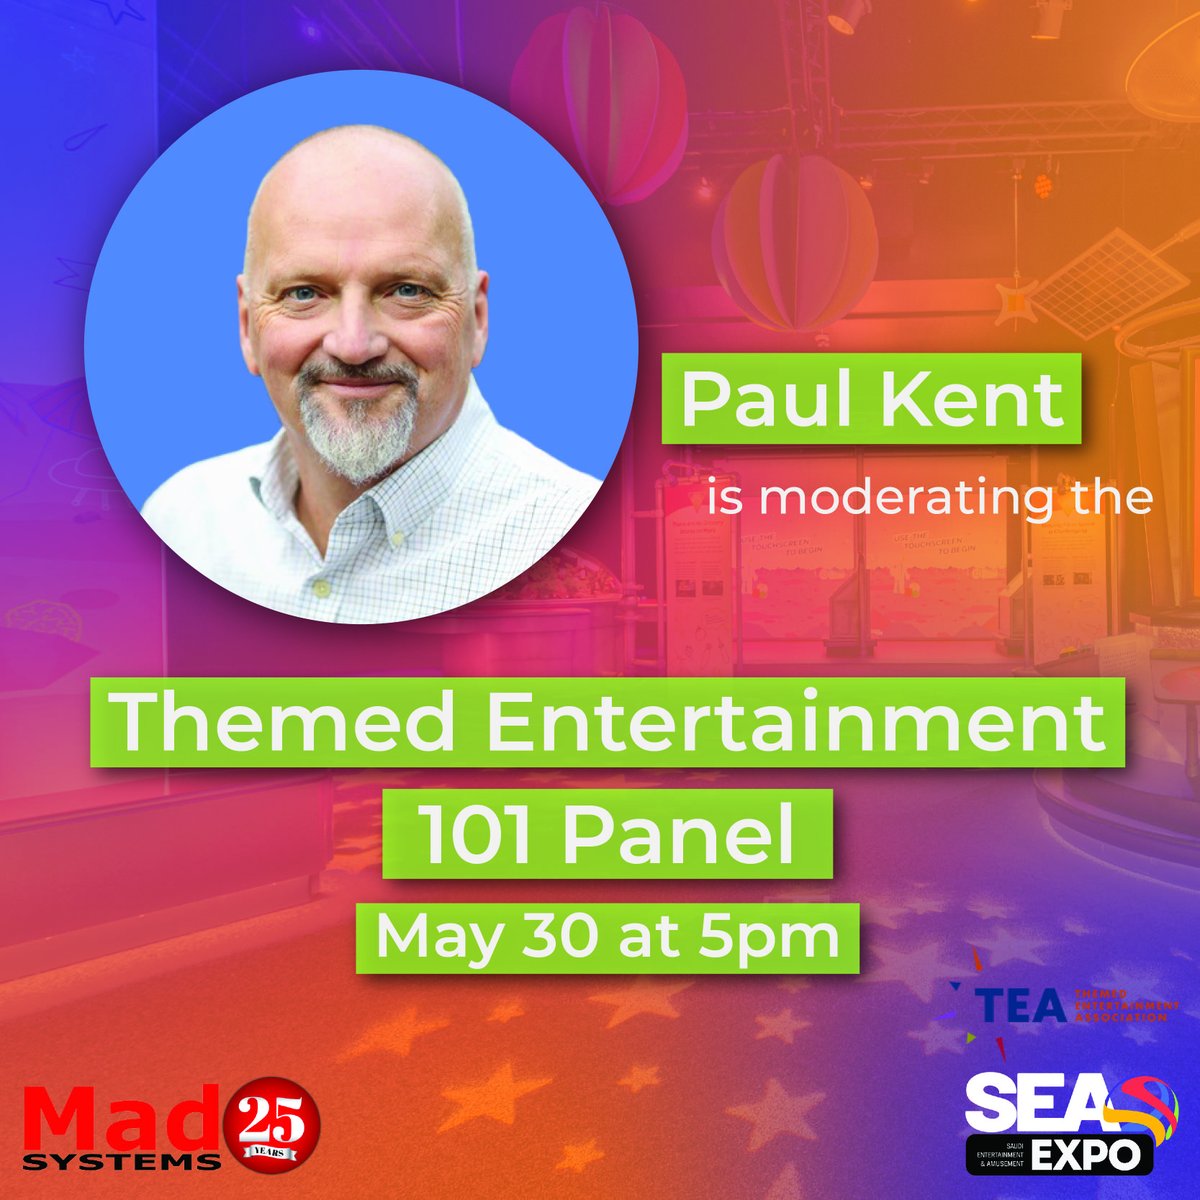 TOMORROW: Paul Kent will moderate the Themed Entertainment 101 Panel in Hall 1 at 17:00! #SEAExpo #SEAExpo2023